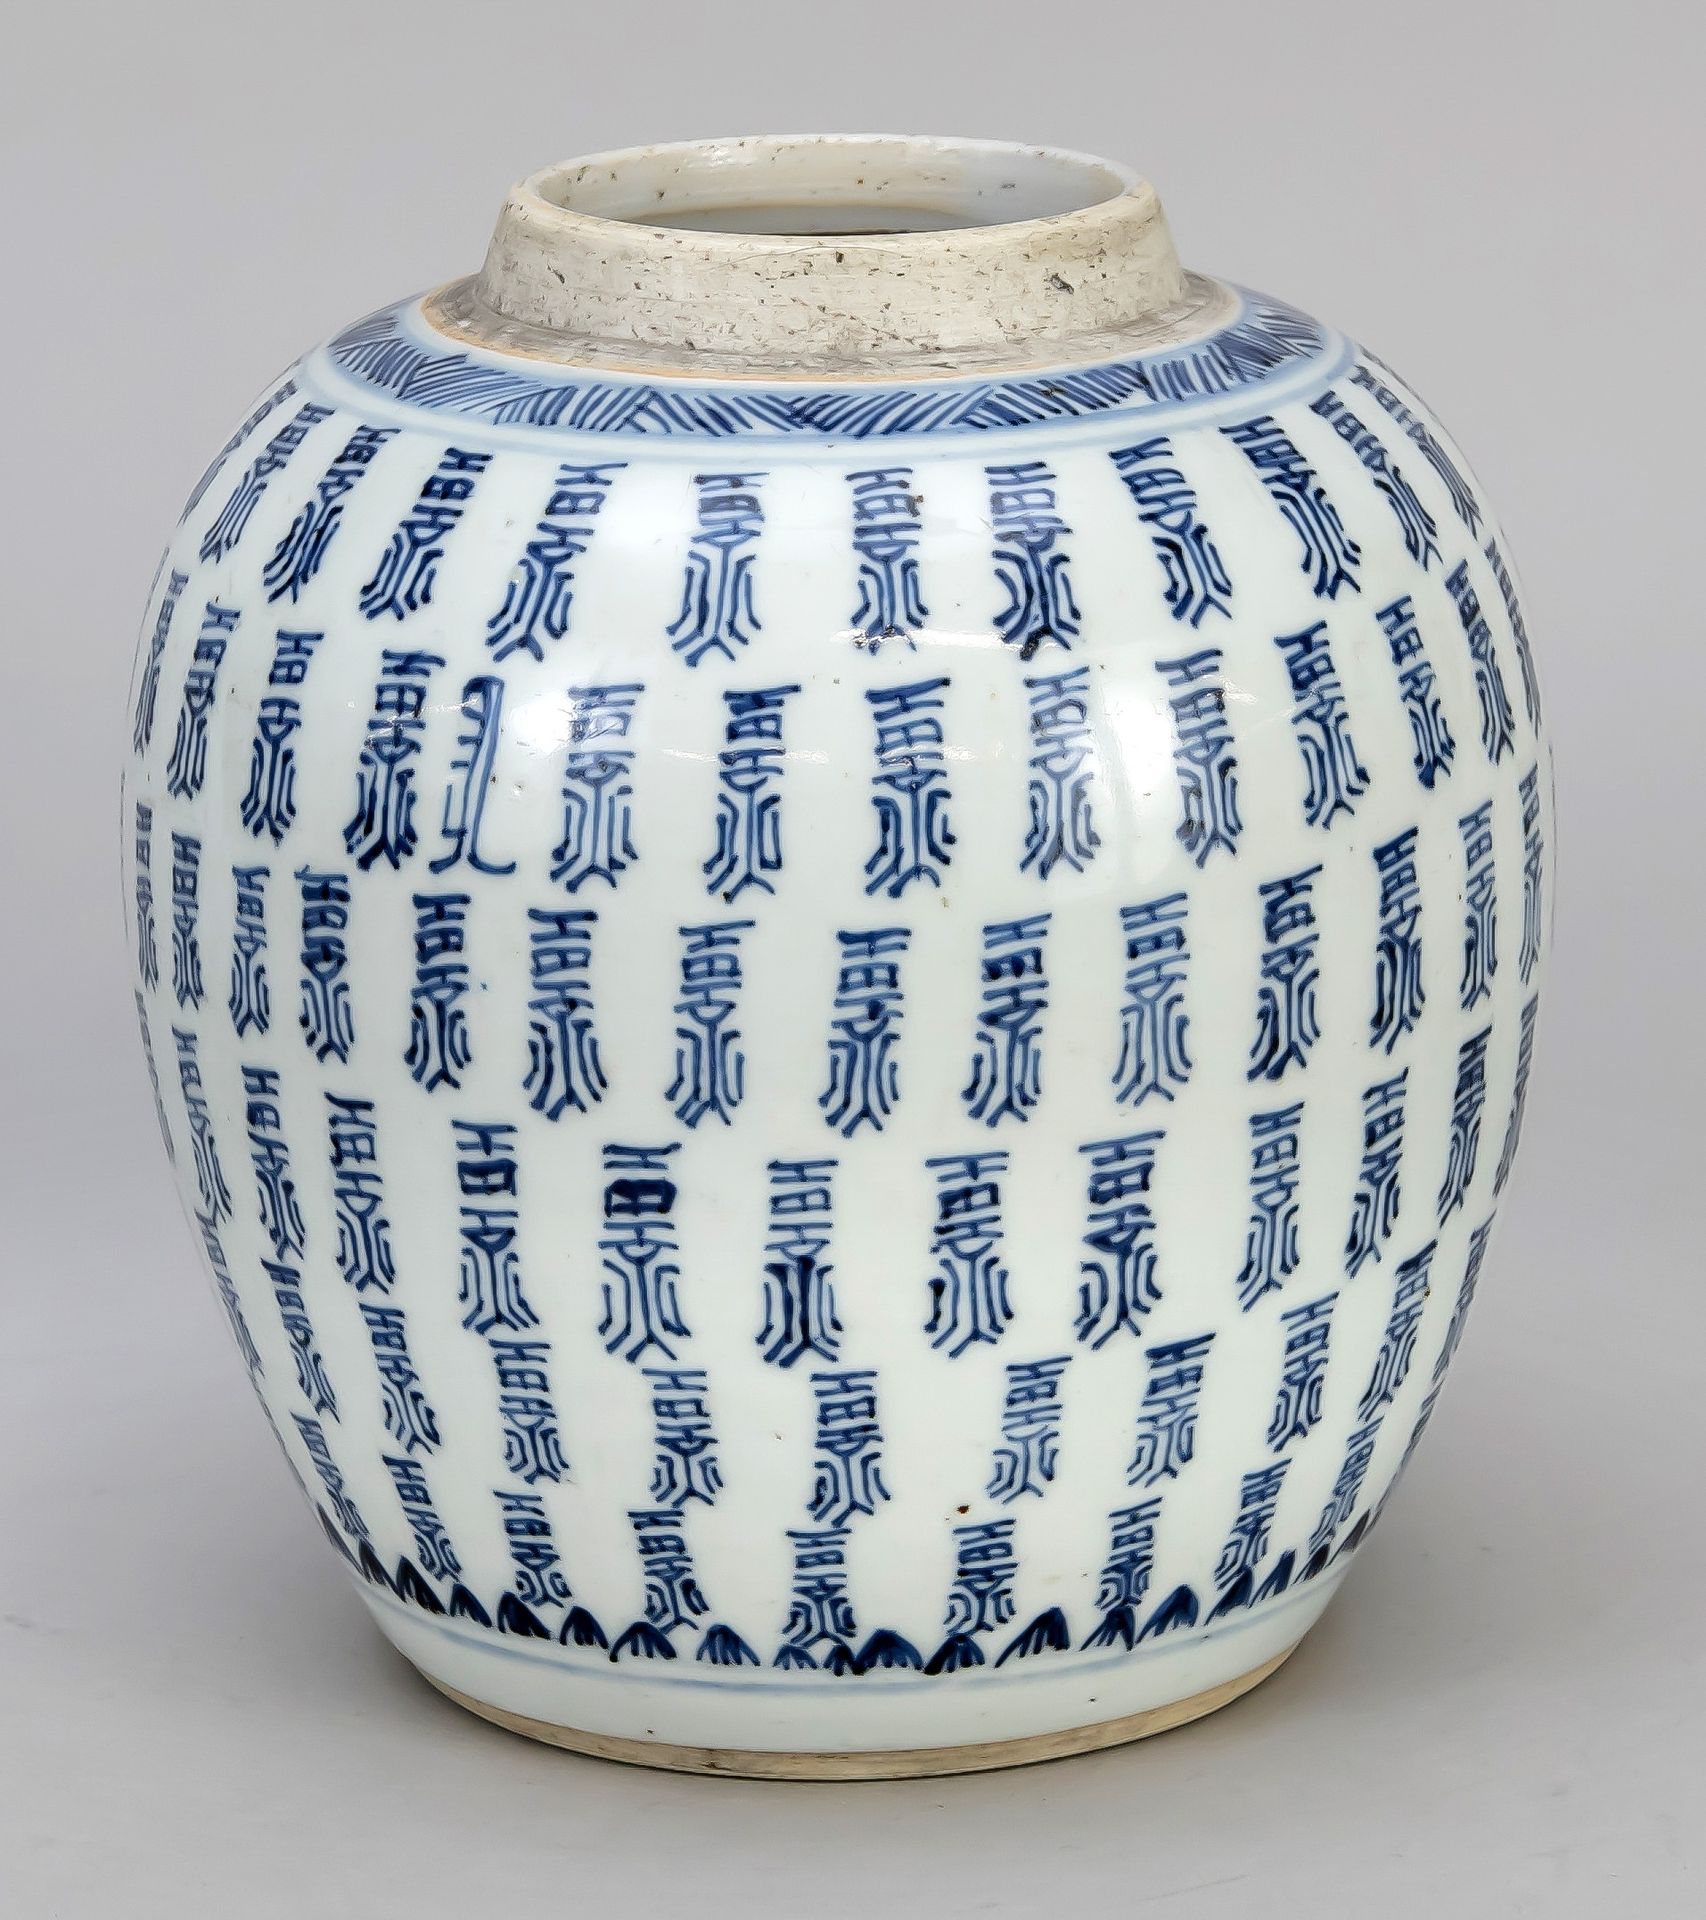 Null Ginger pot, China, 19th century, decorated all around with 6 register chara&hellip;